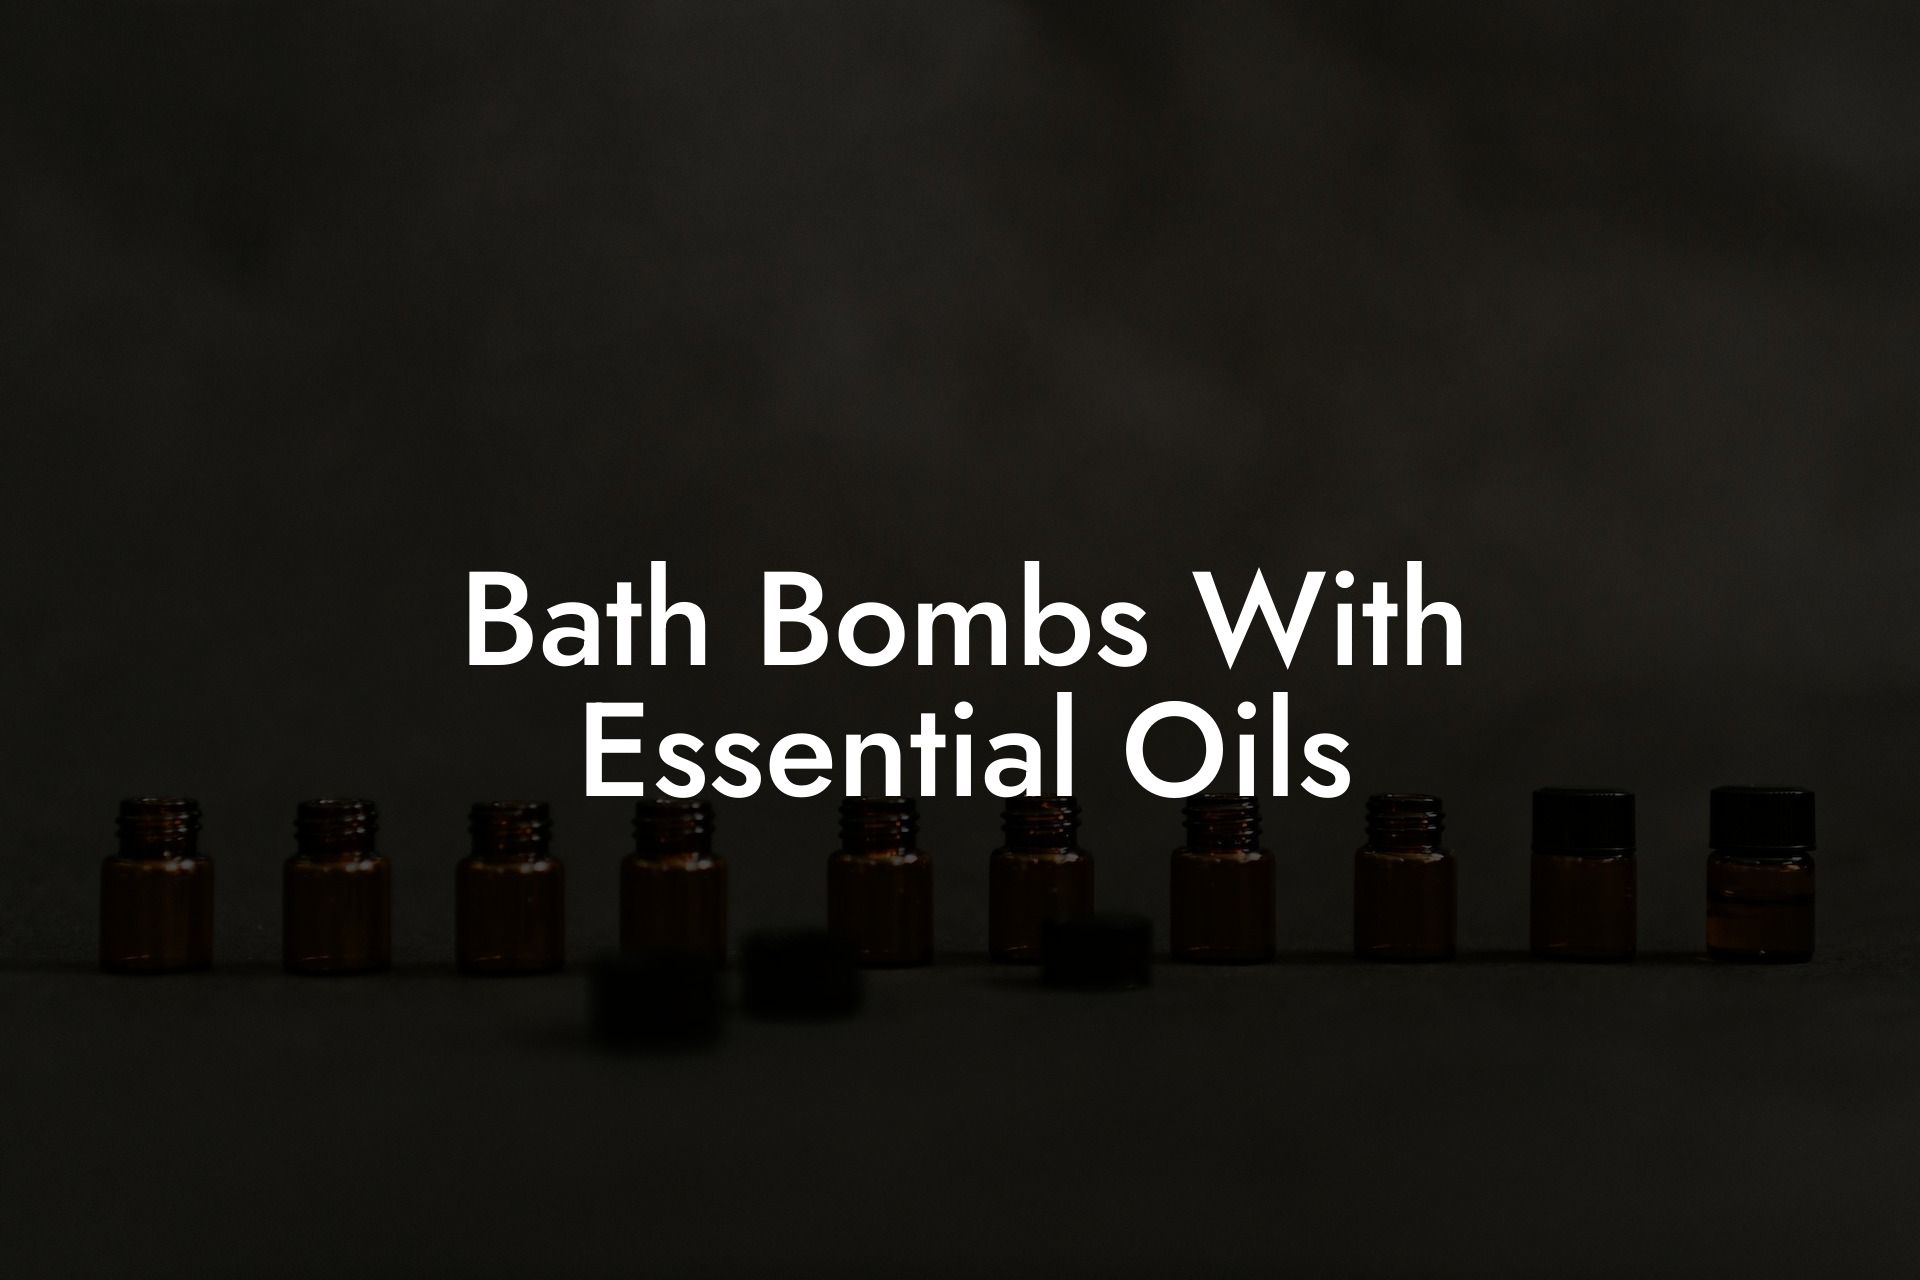 Bath Bombs With Essential Oils